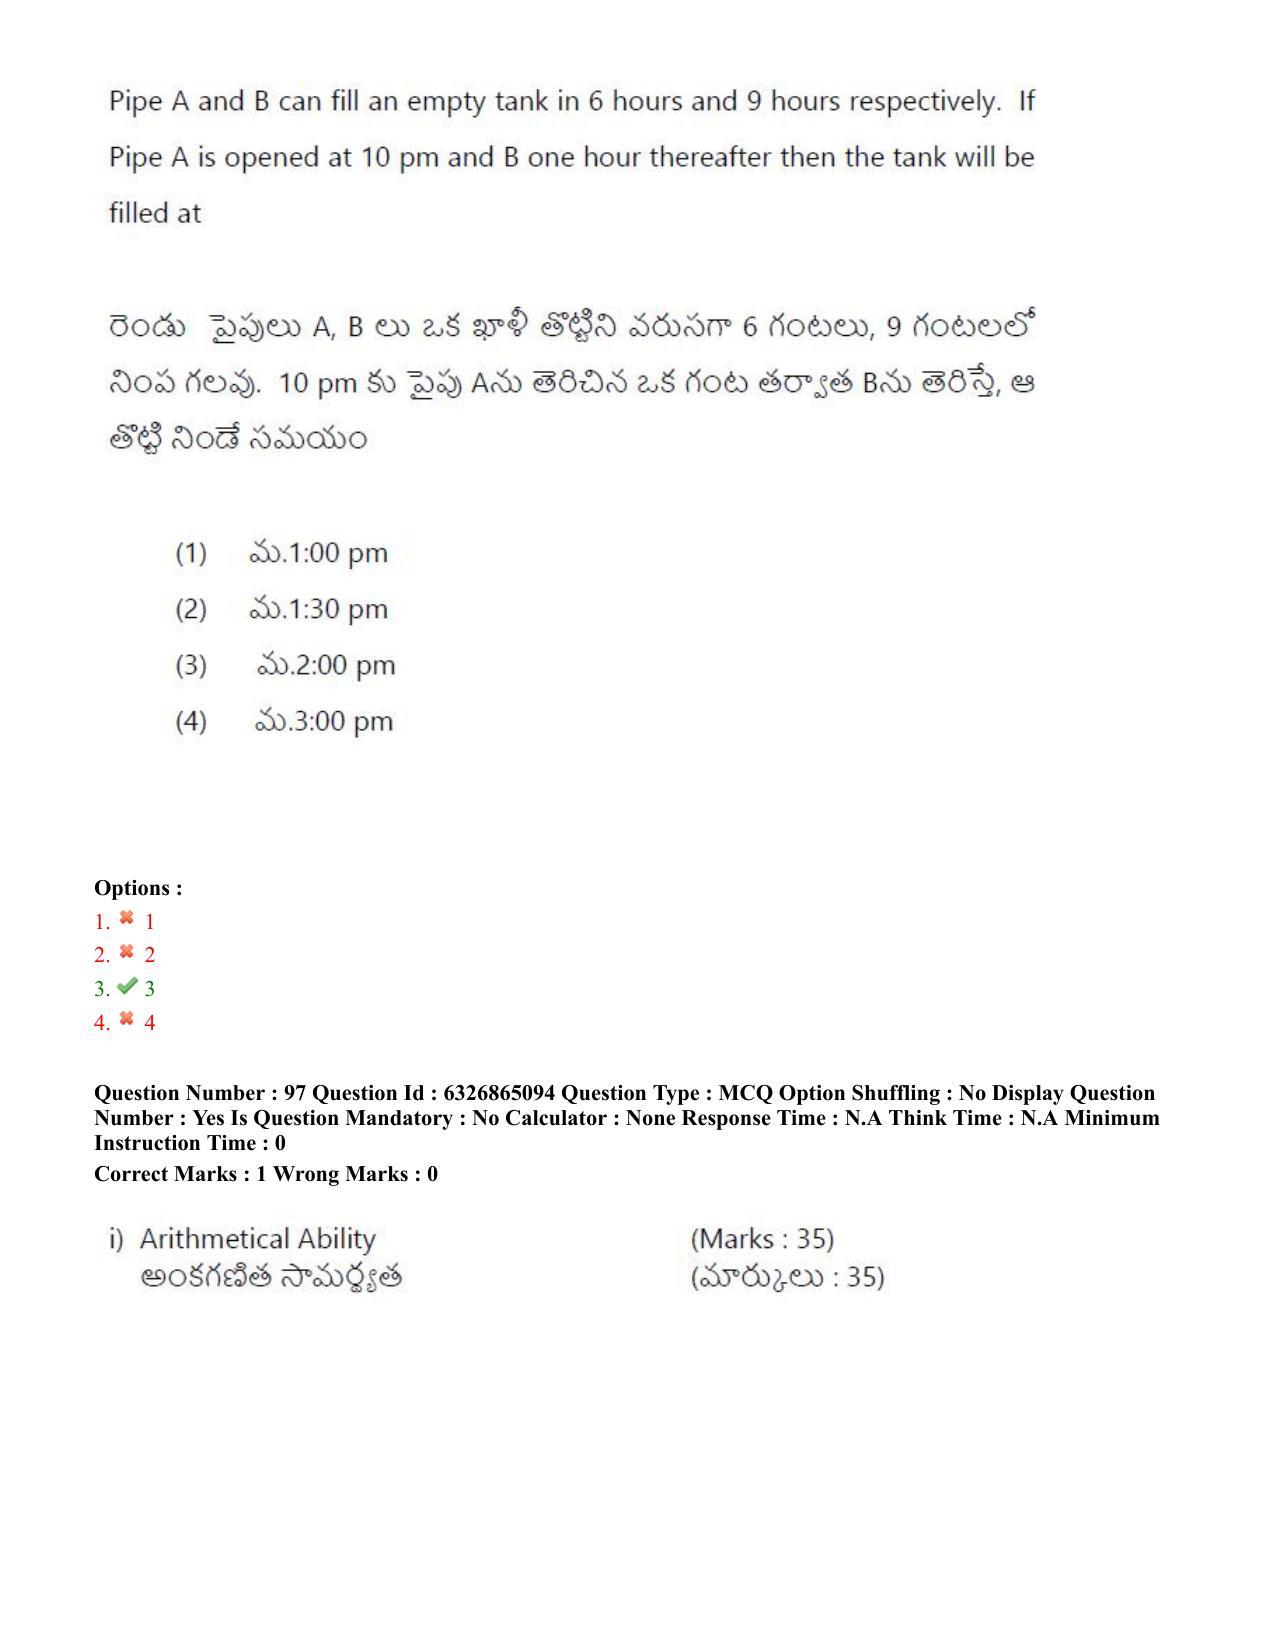 TS ICET 2022 Question Paper 2 - Jul 28, 2022	 - Page 91